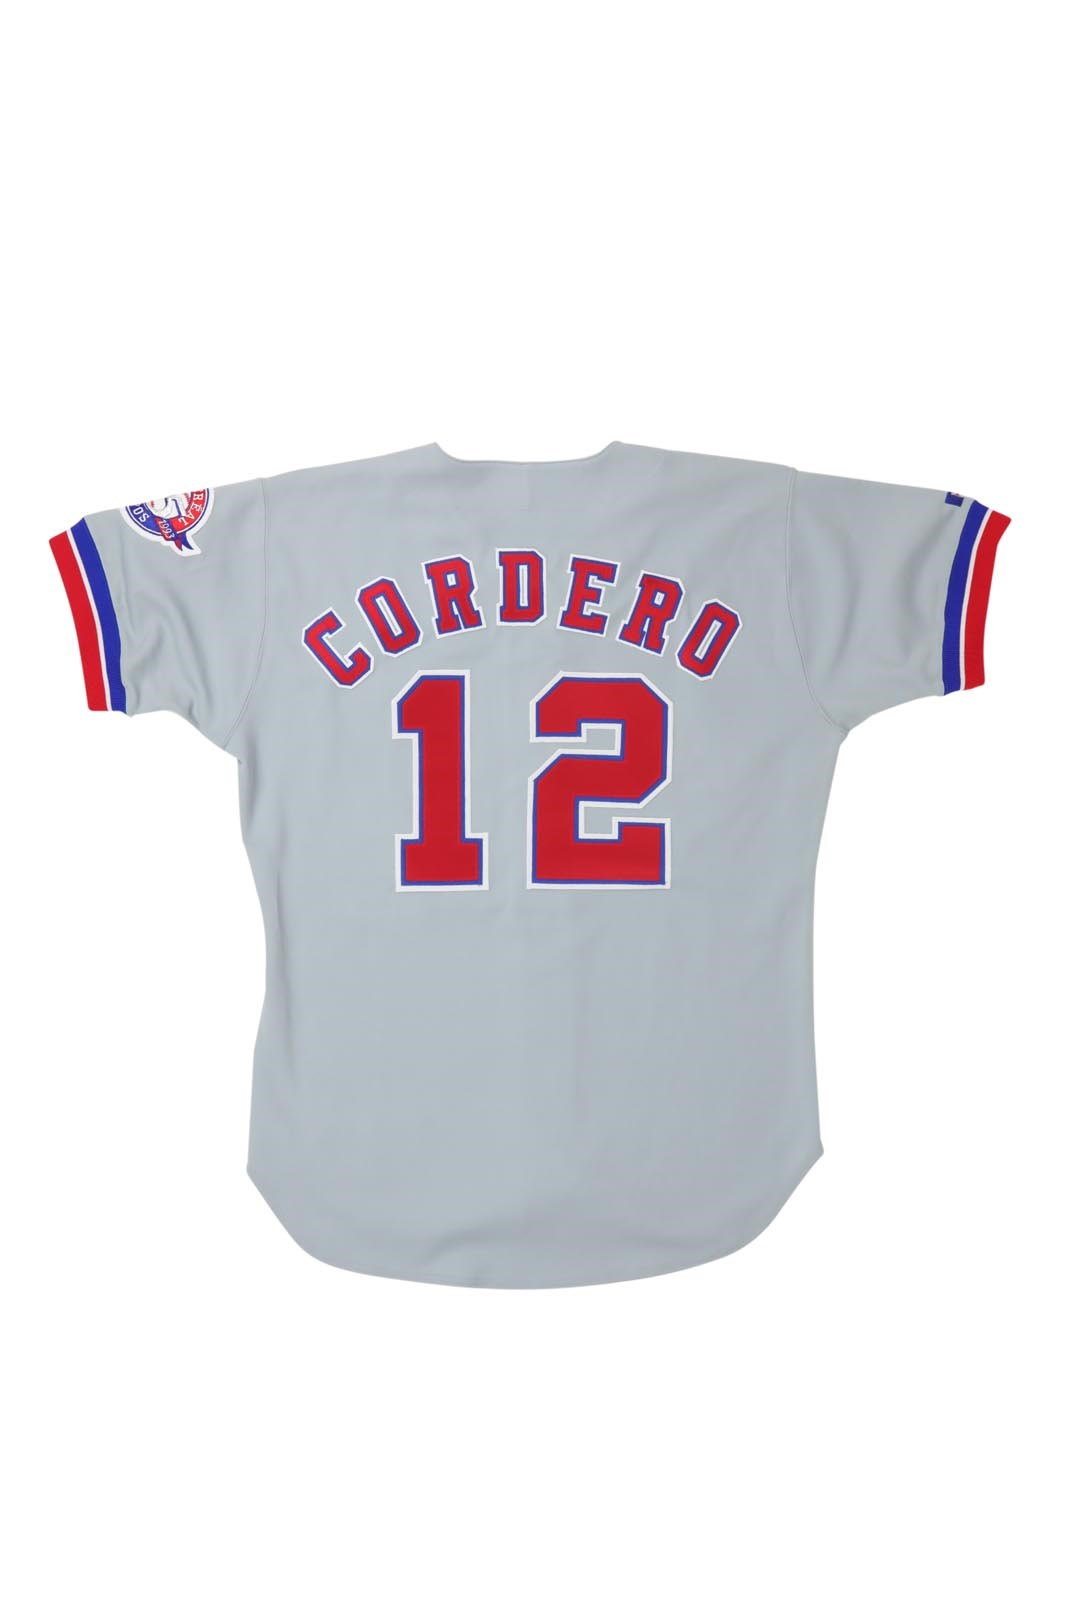 Baseball Equipment - 1993 Wil Cordero Montreal Expos Game Worn Jersey w/25th Anniversary Patch